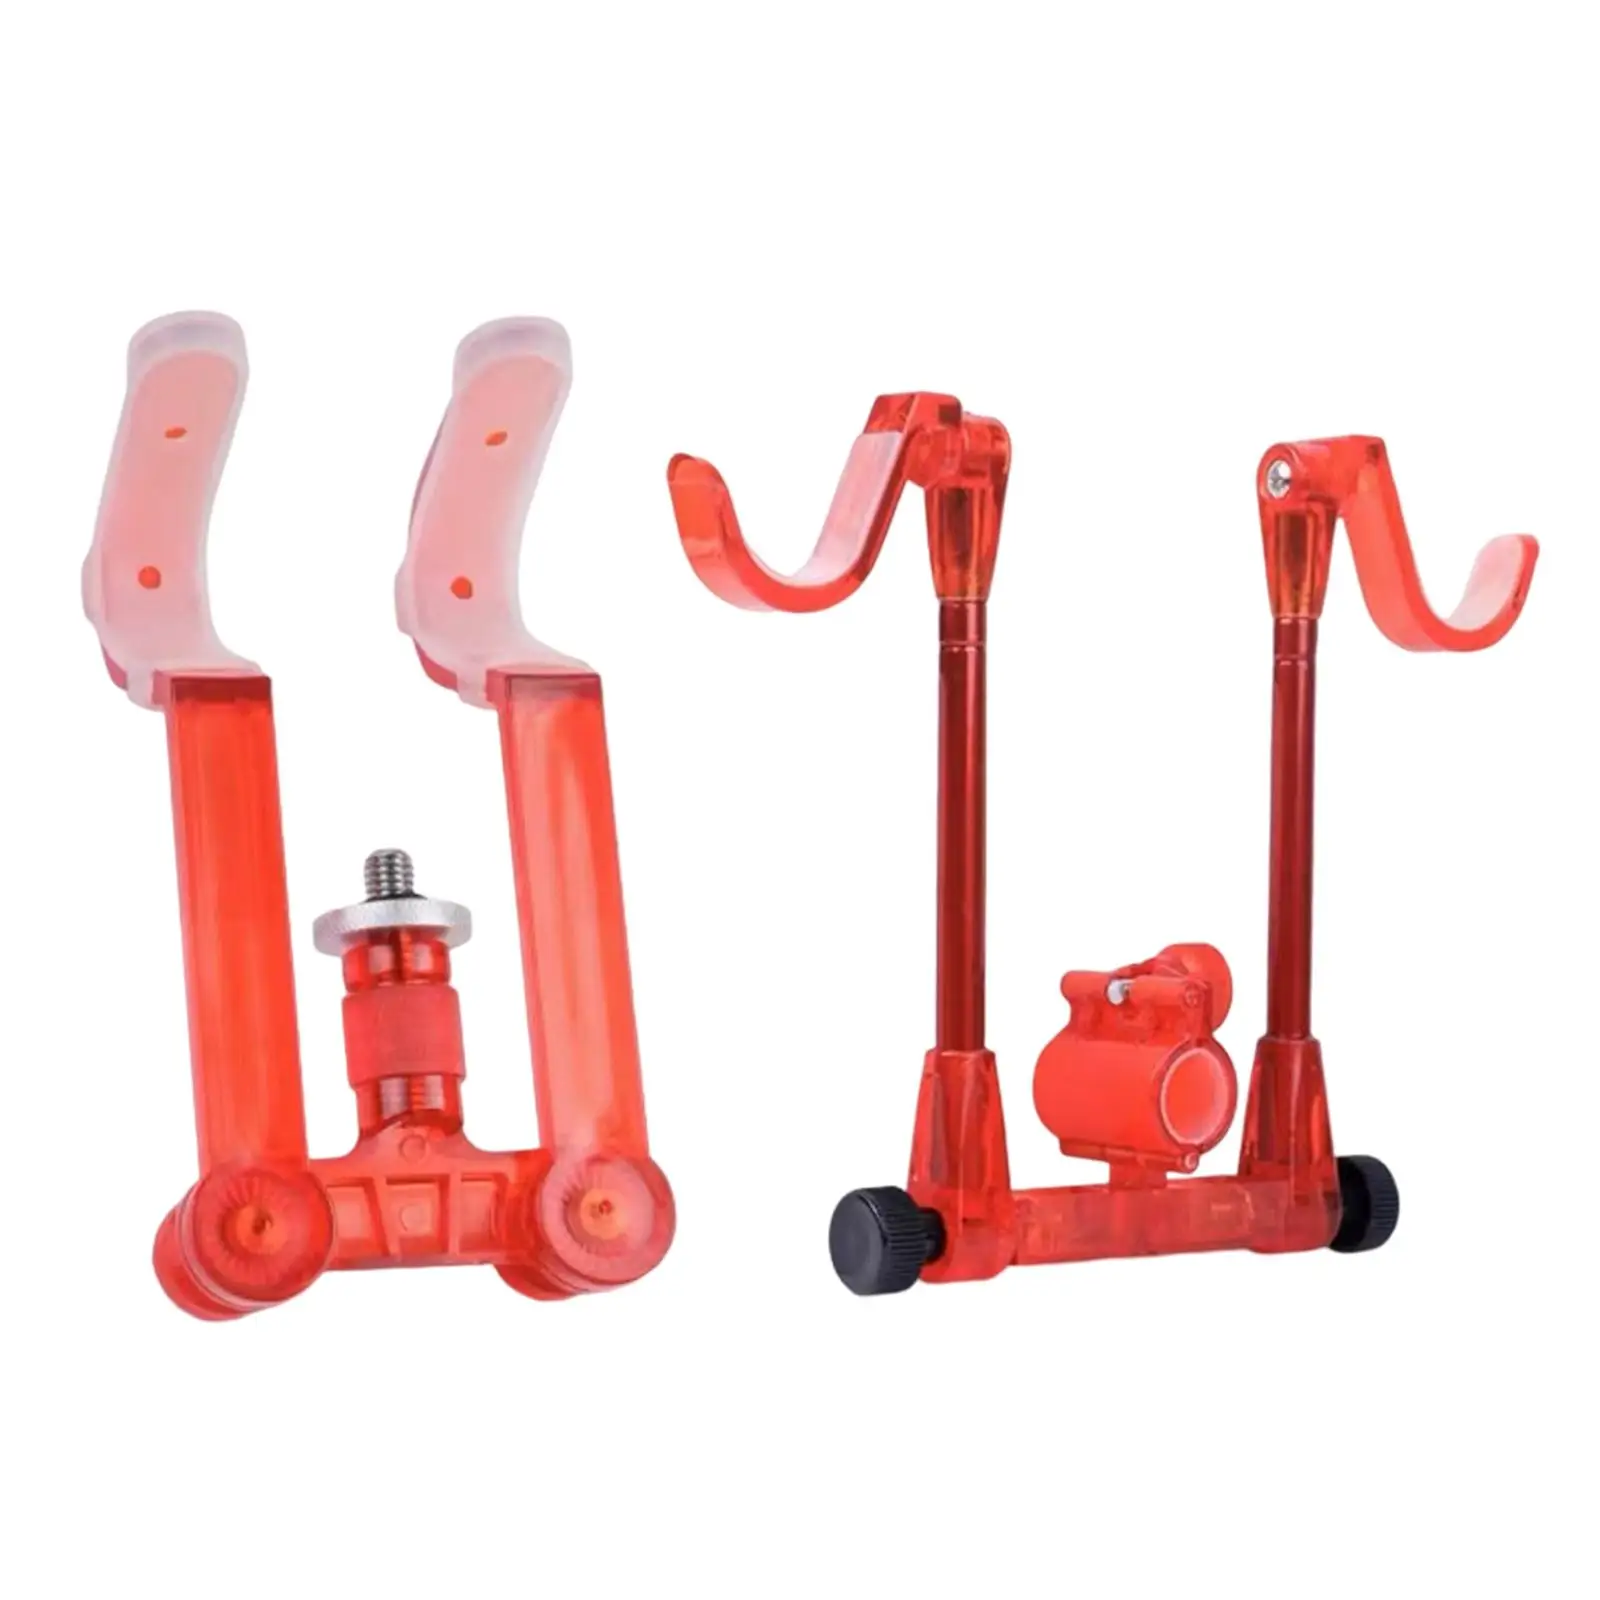 Fishing Rods Holder Rest Support Stand Accessory Equipment Portable Fishing Rod Rack Stand for Outdoor Men Fishing Beach Lake